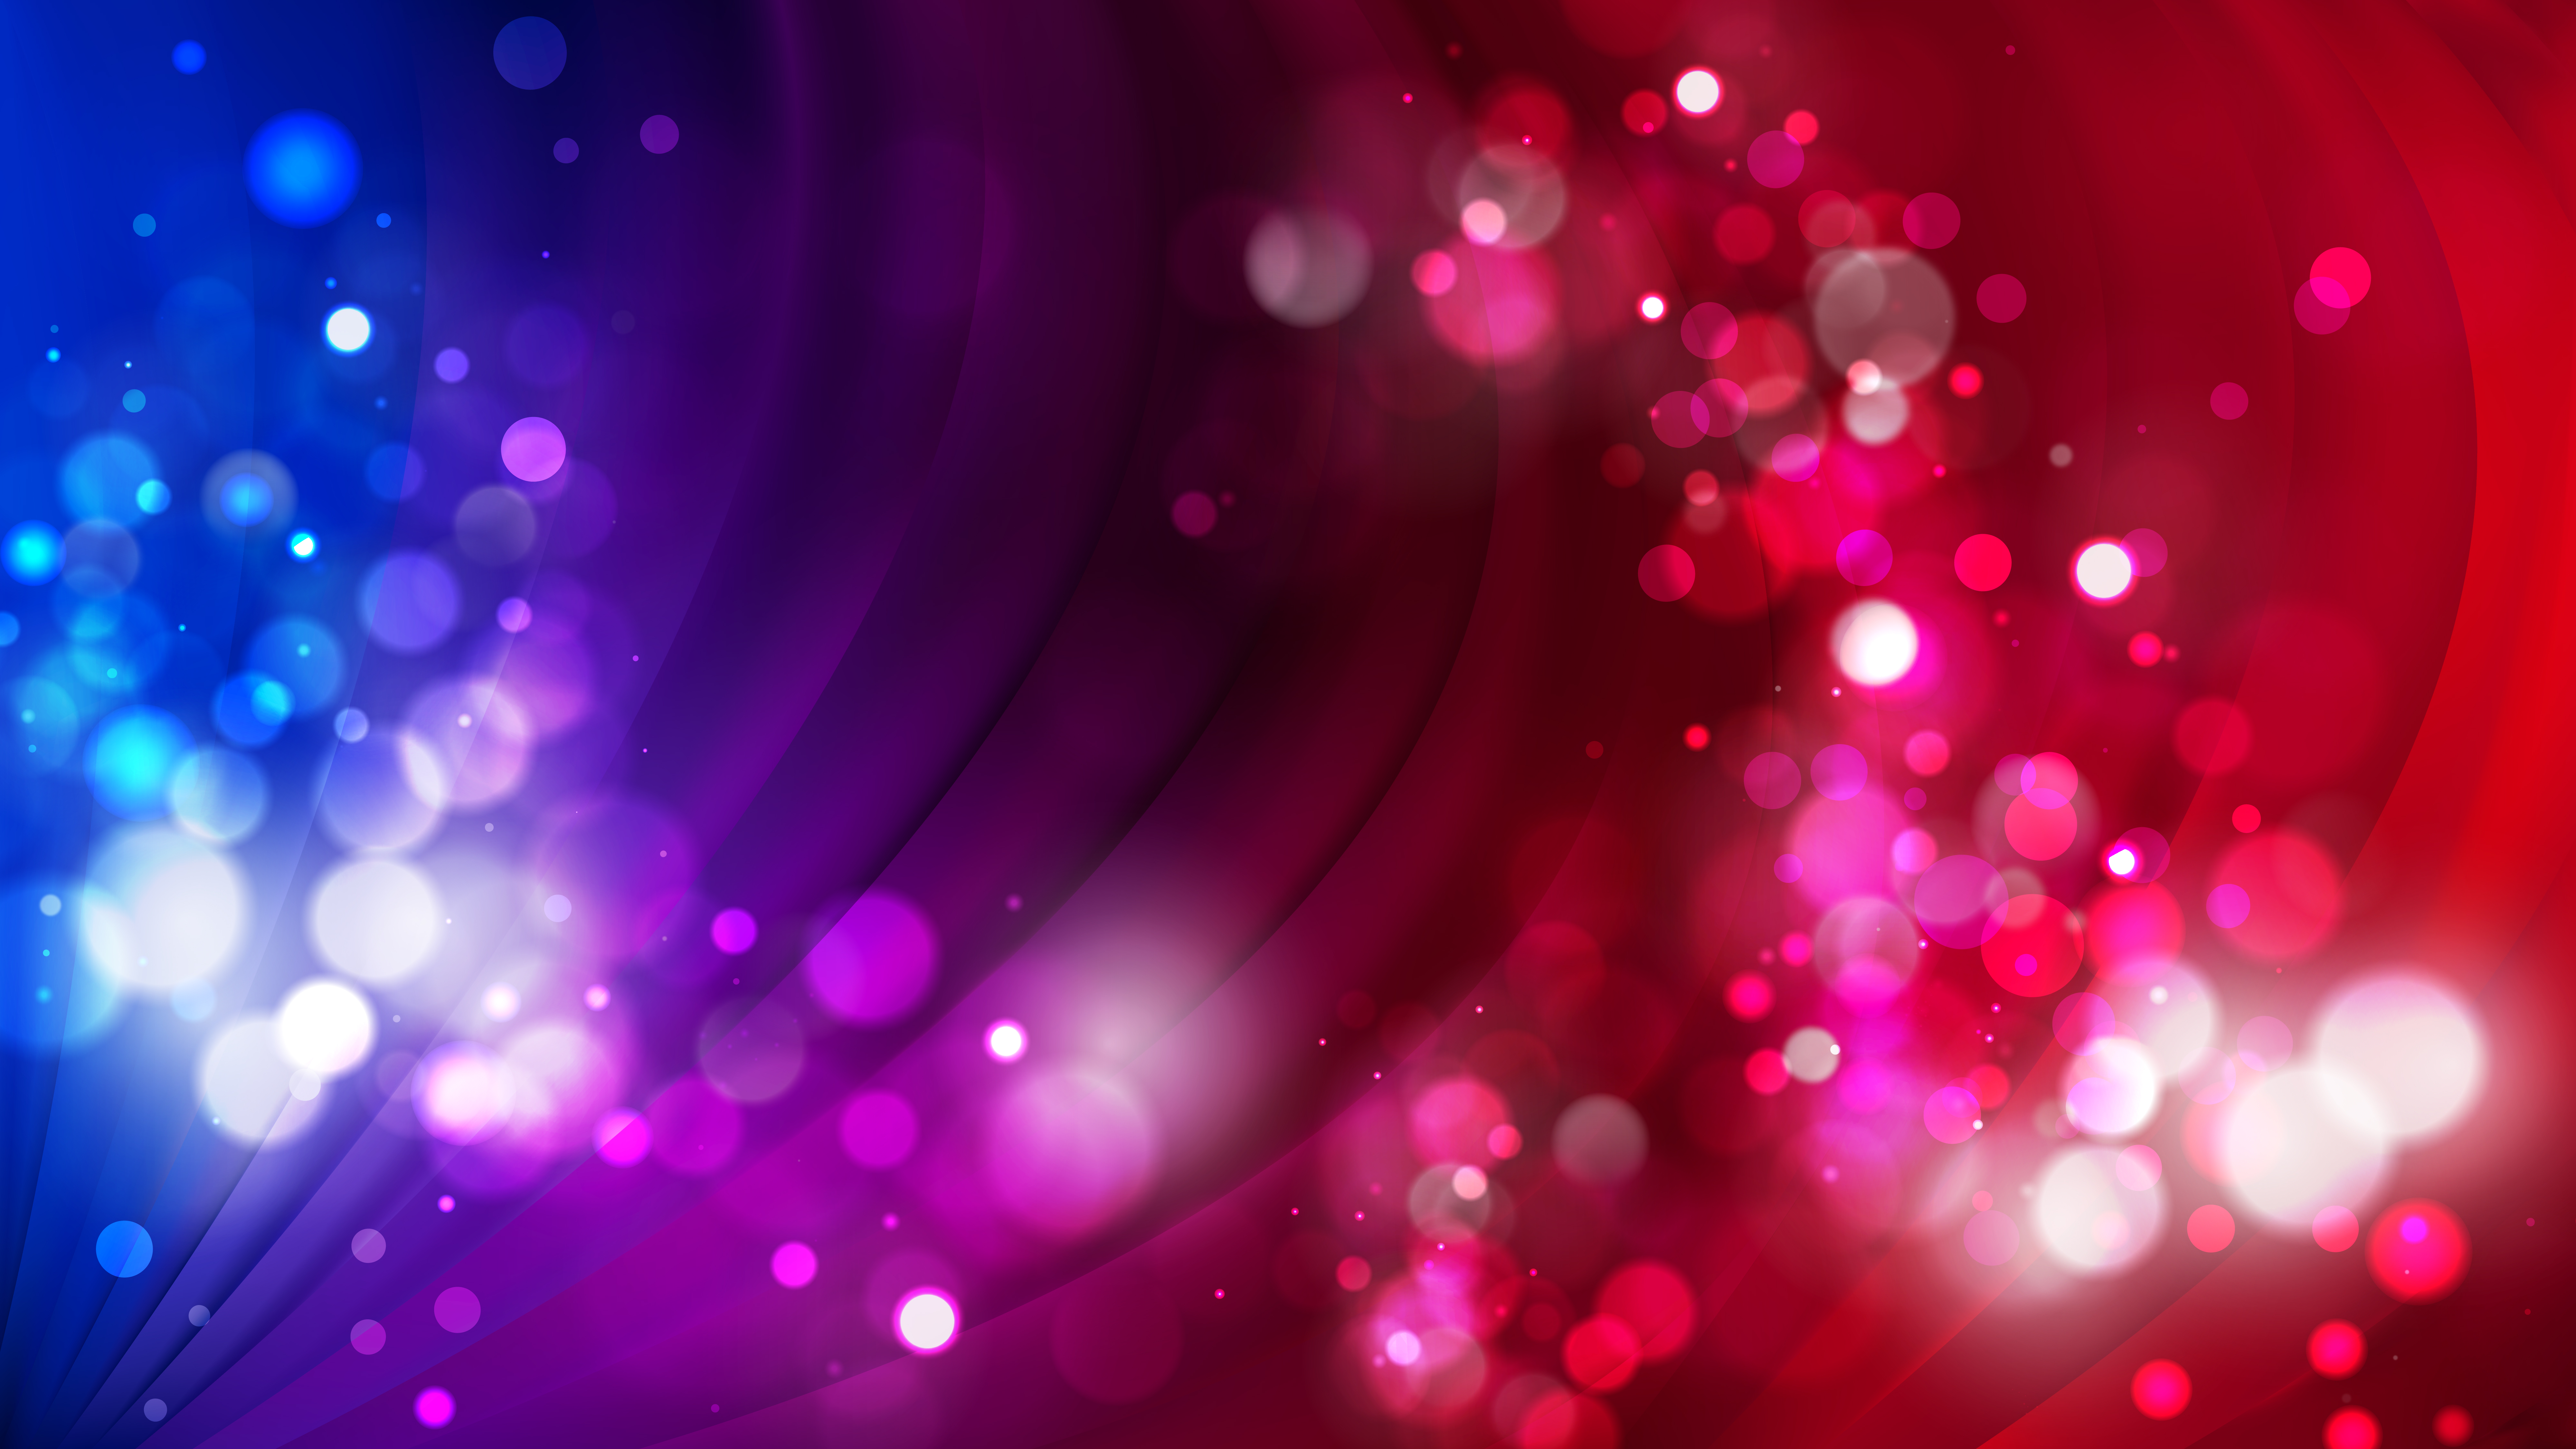 Red And Purple Background, Buy Now, Sale, 53% OFF, 